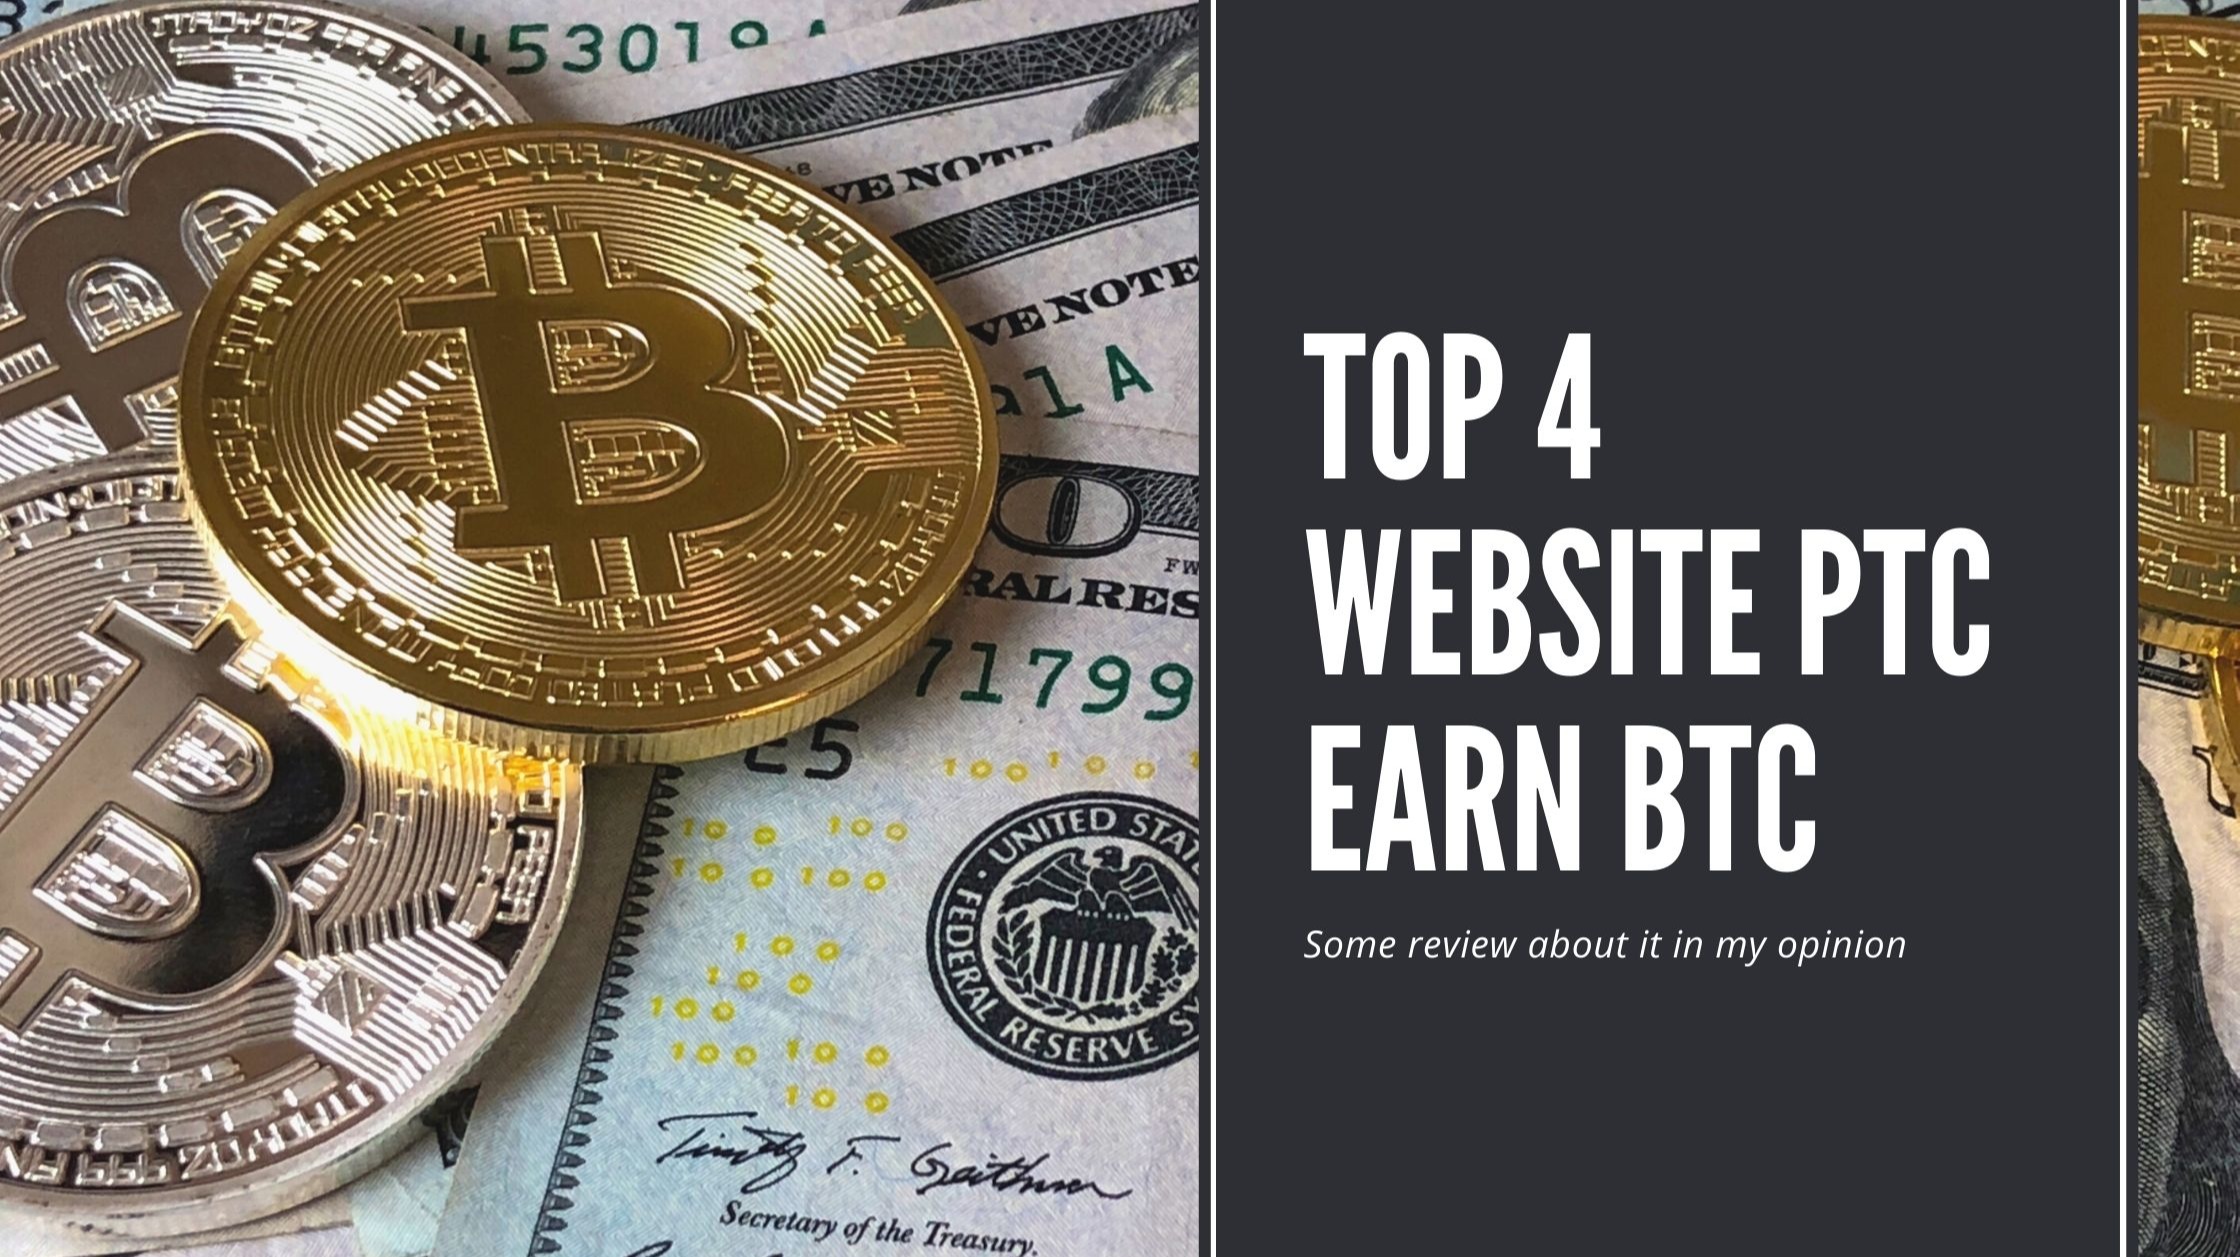 Bitcoin PTC (Paid to Click) Site - Earn BTC for Viewing Ads | BitPaye